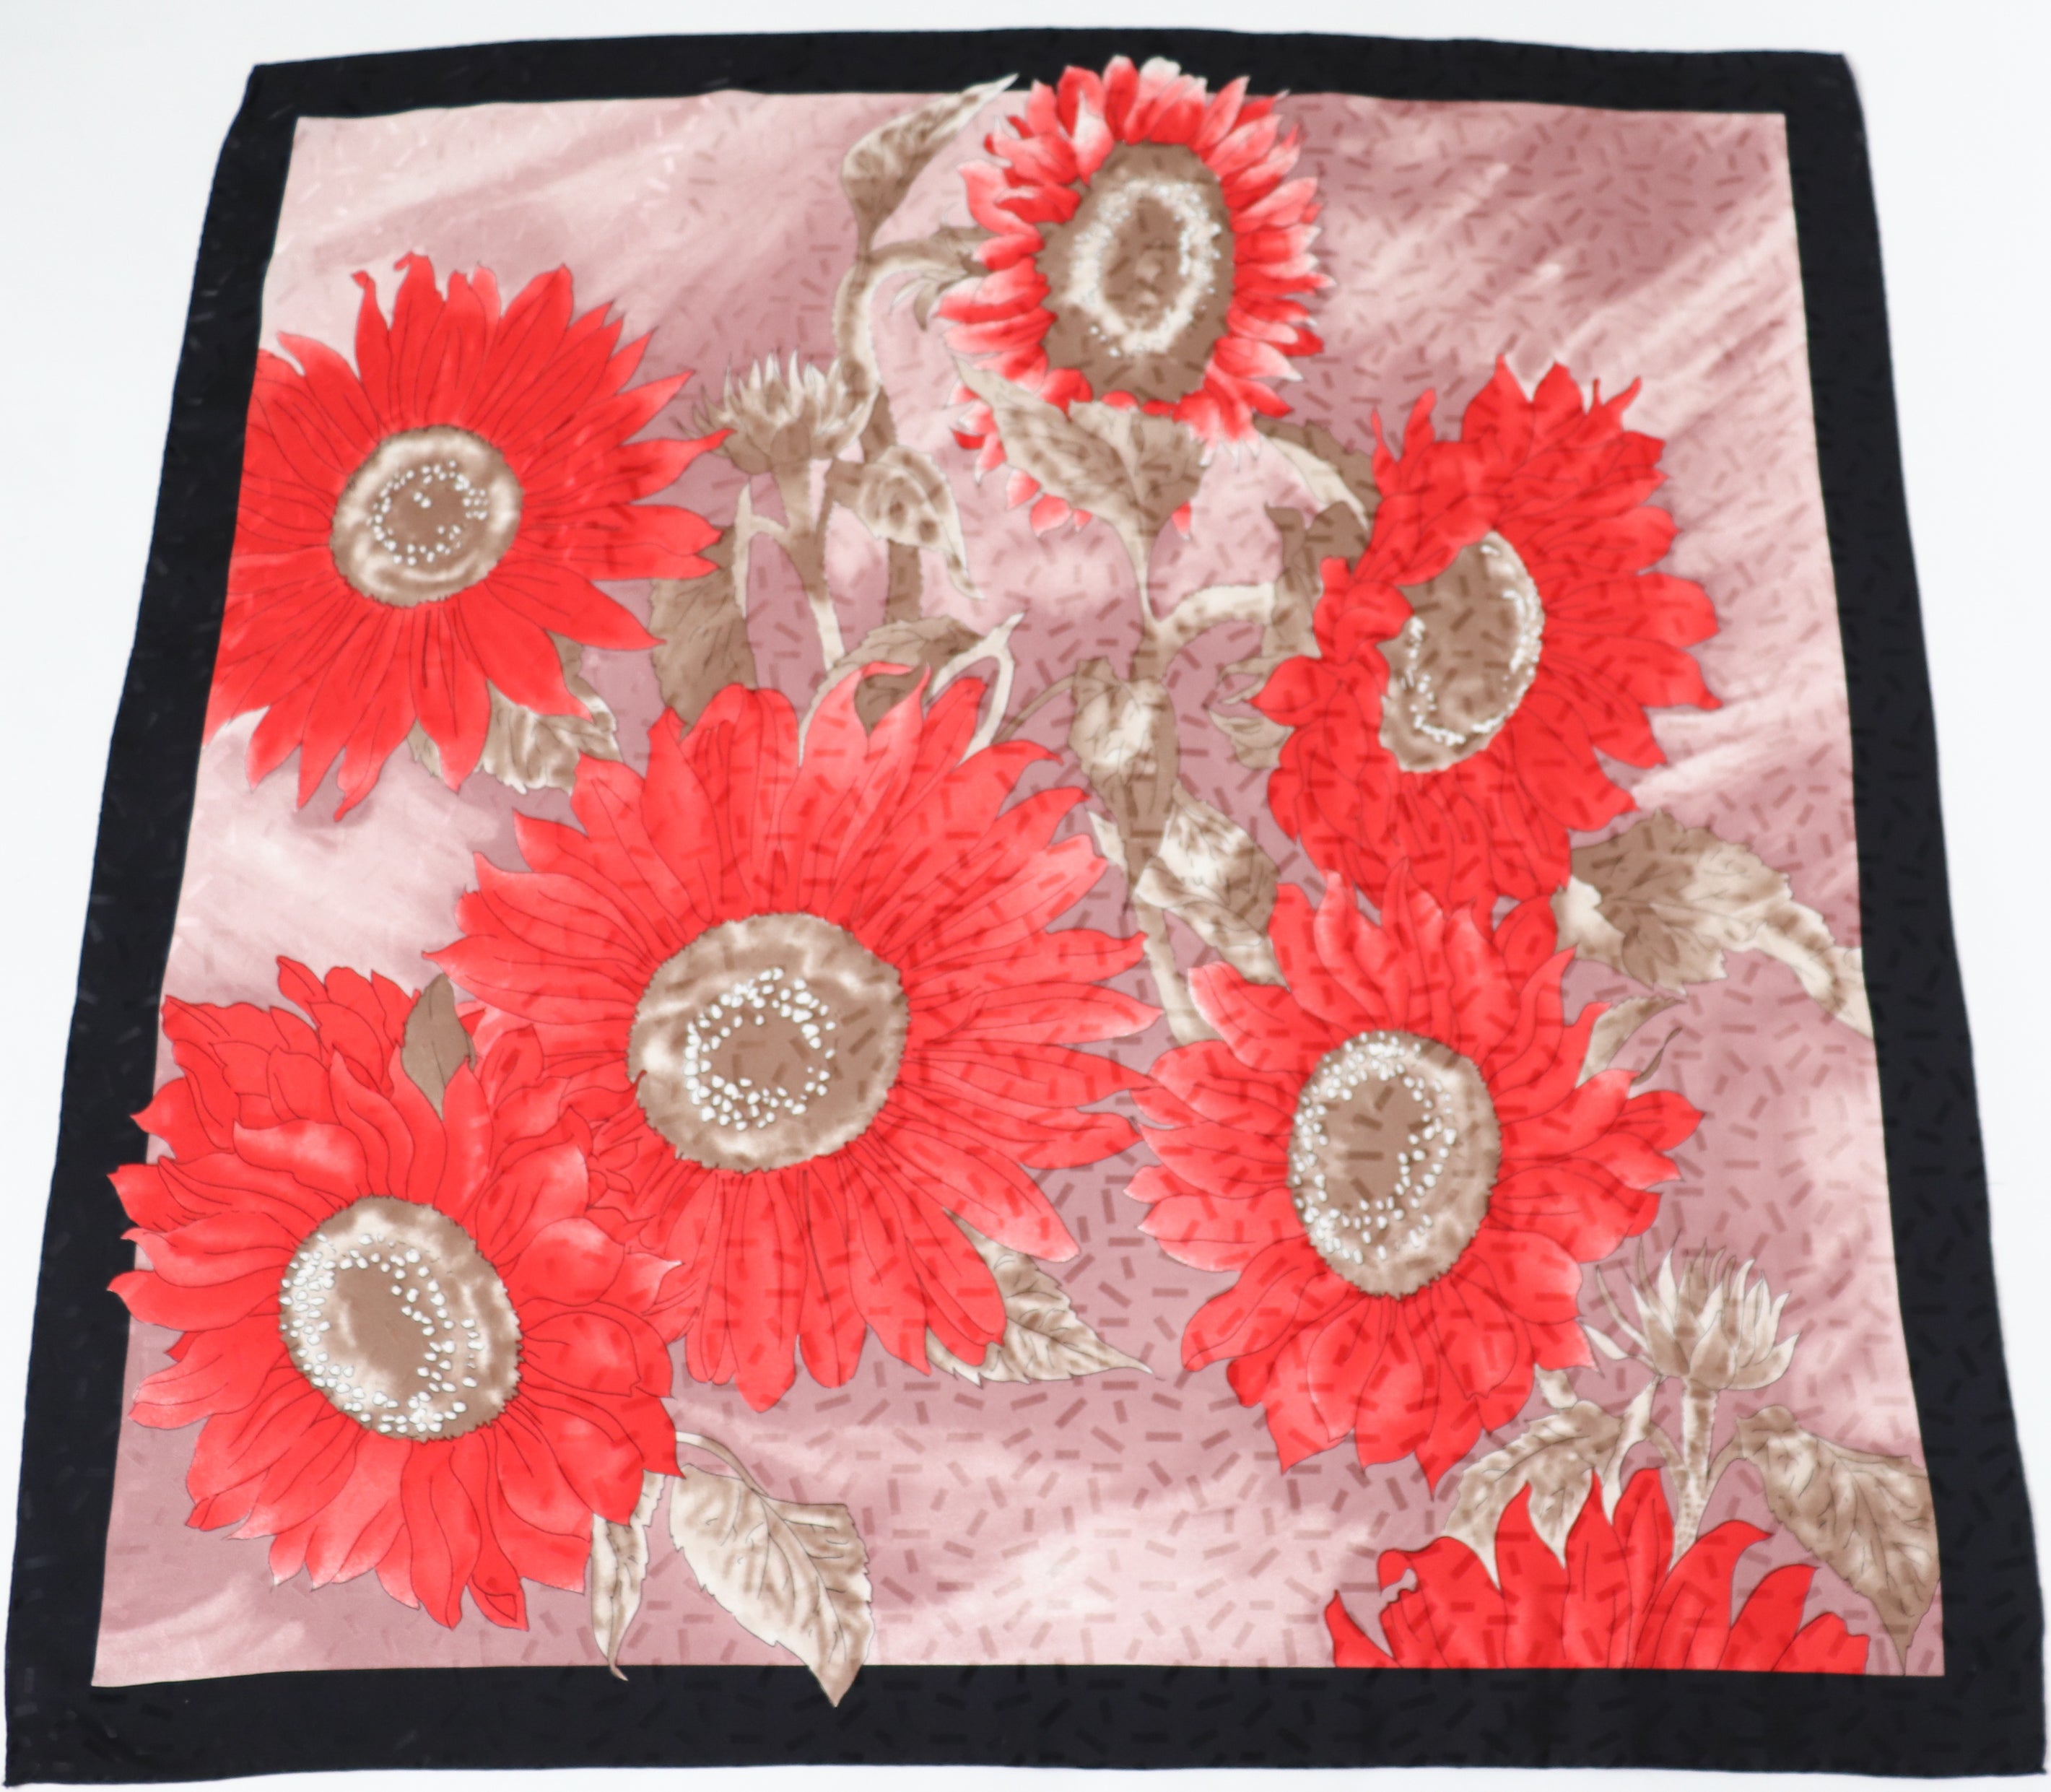 Vintage Silk Scarf - Red Sunflowers - LARGE